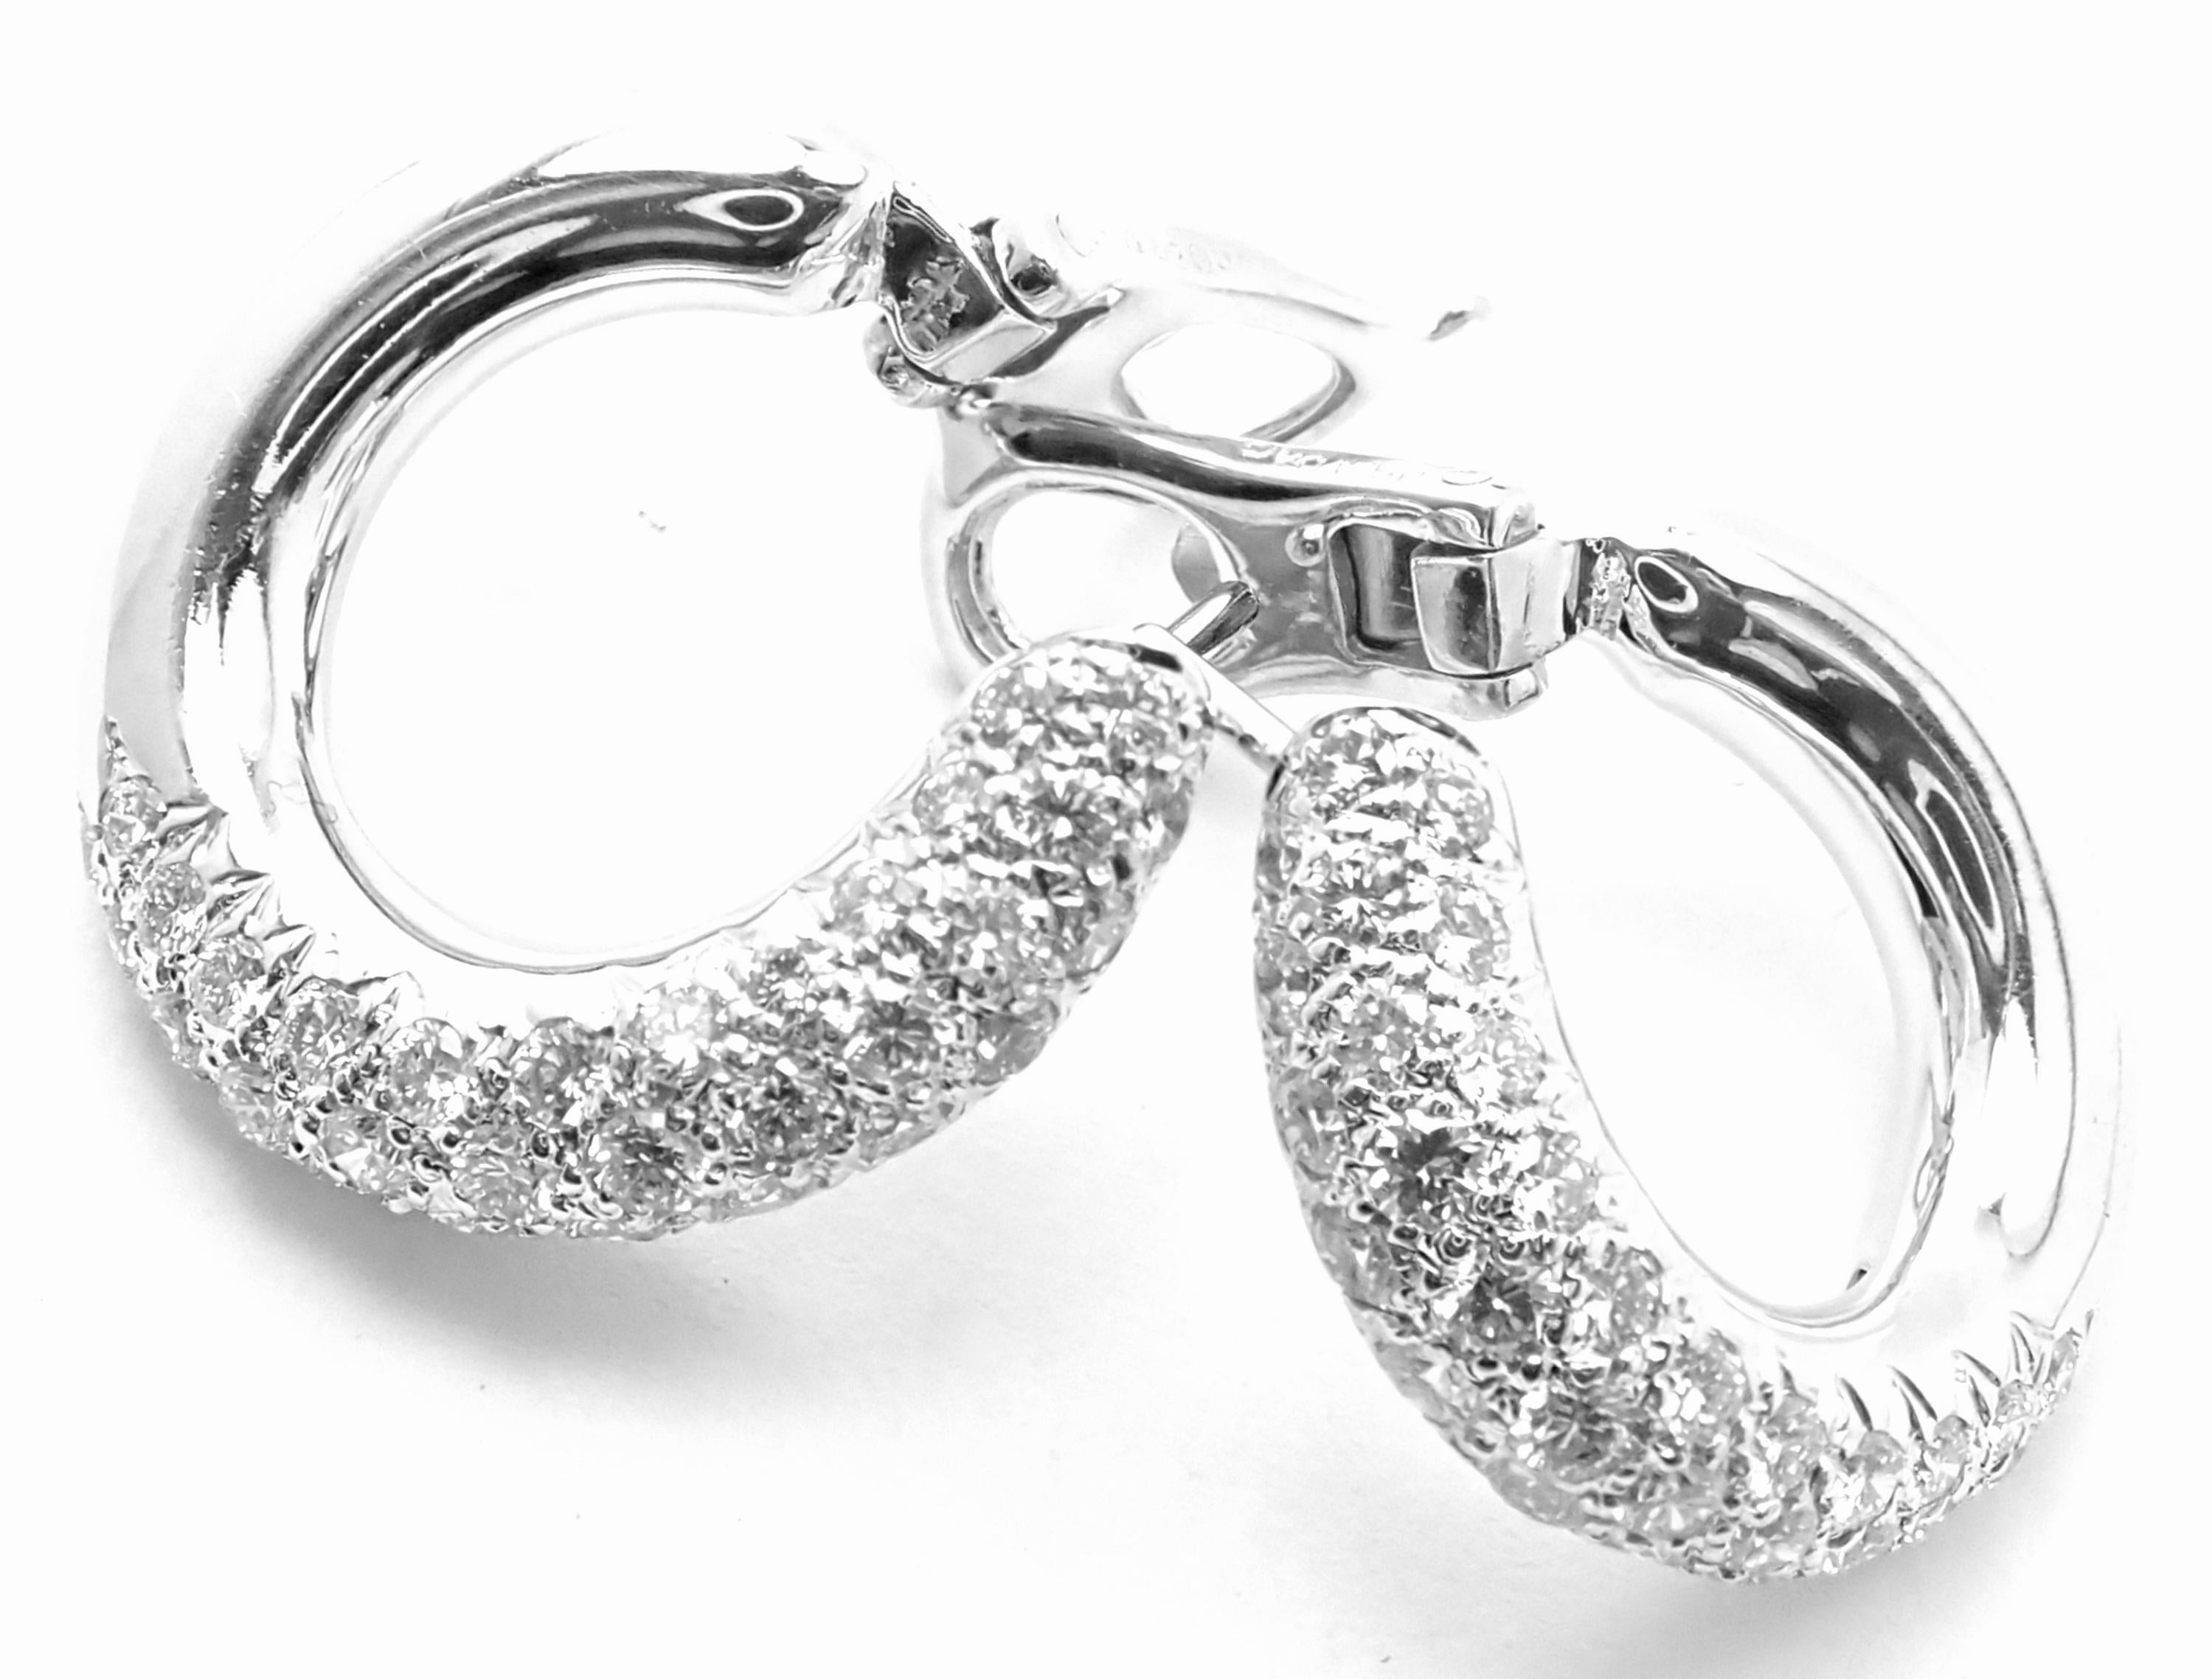 18k White Gold Diamond Hoop Earrings by Van Cleef & Arpels. 
With 68 round brilliant cut diamonds VVS1 clarity, E color total weight approx. 1.70ct
These earrings are for pierced ears.
These earrings come with Van Cleef & Arpels box and a service